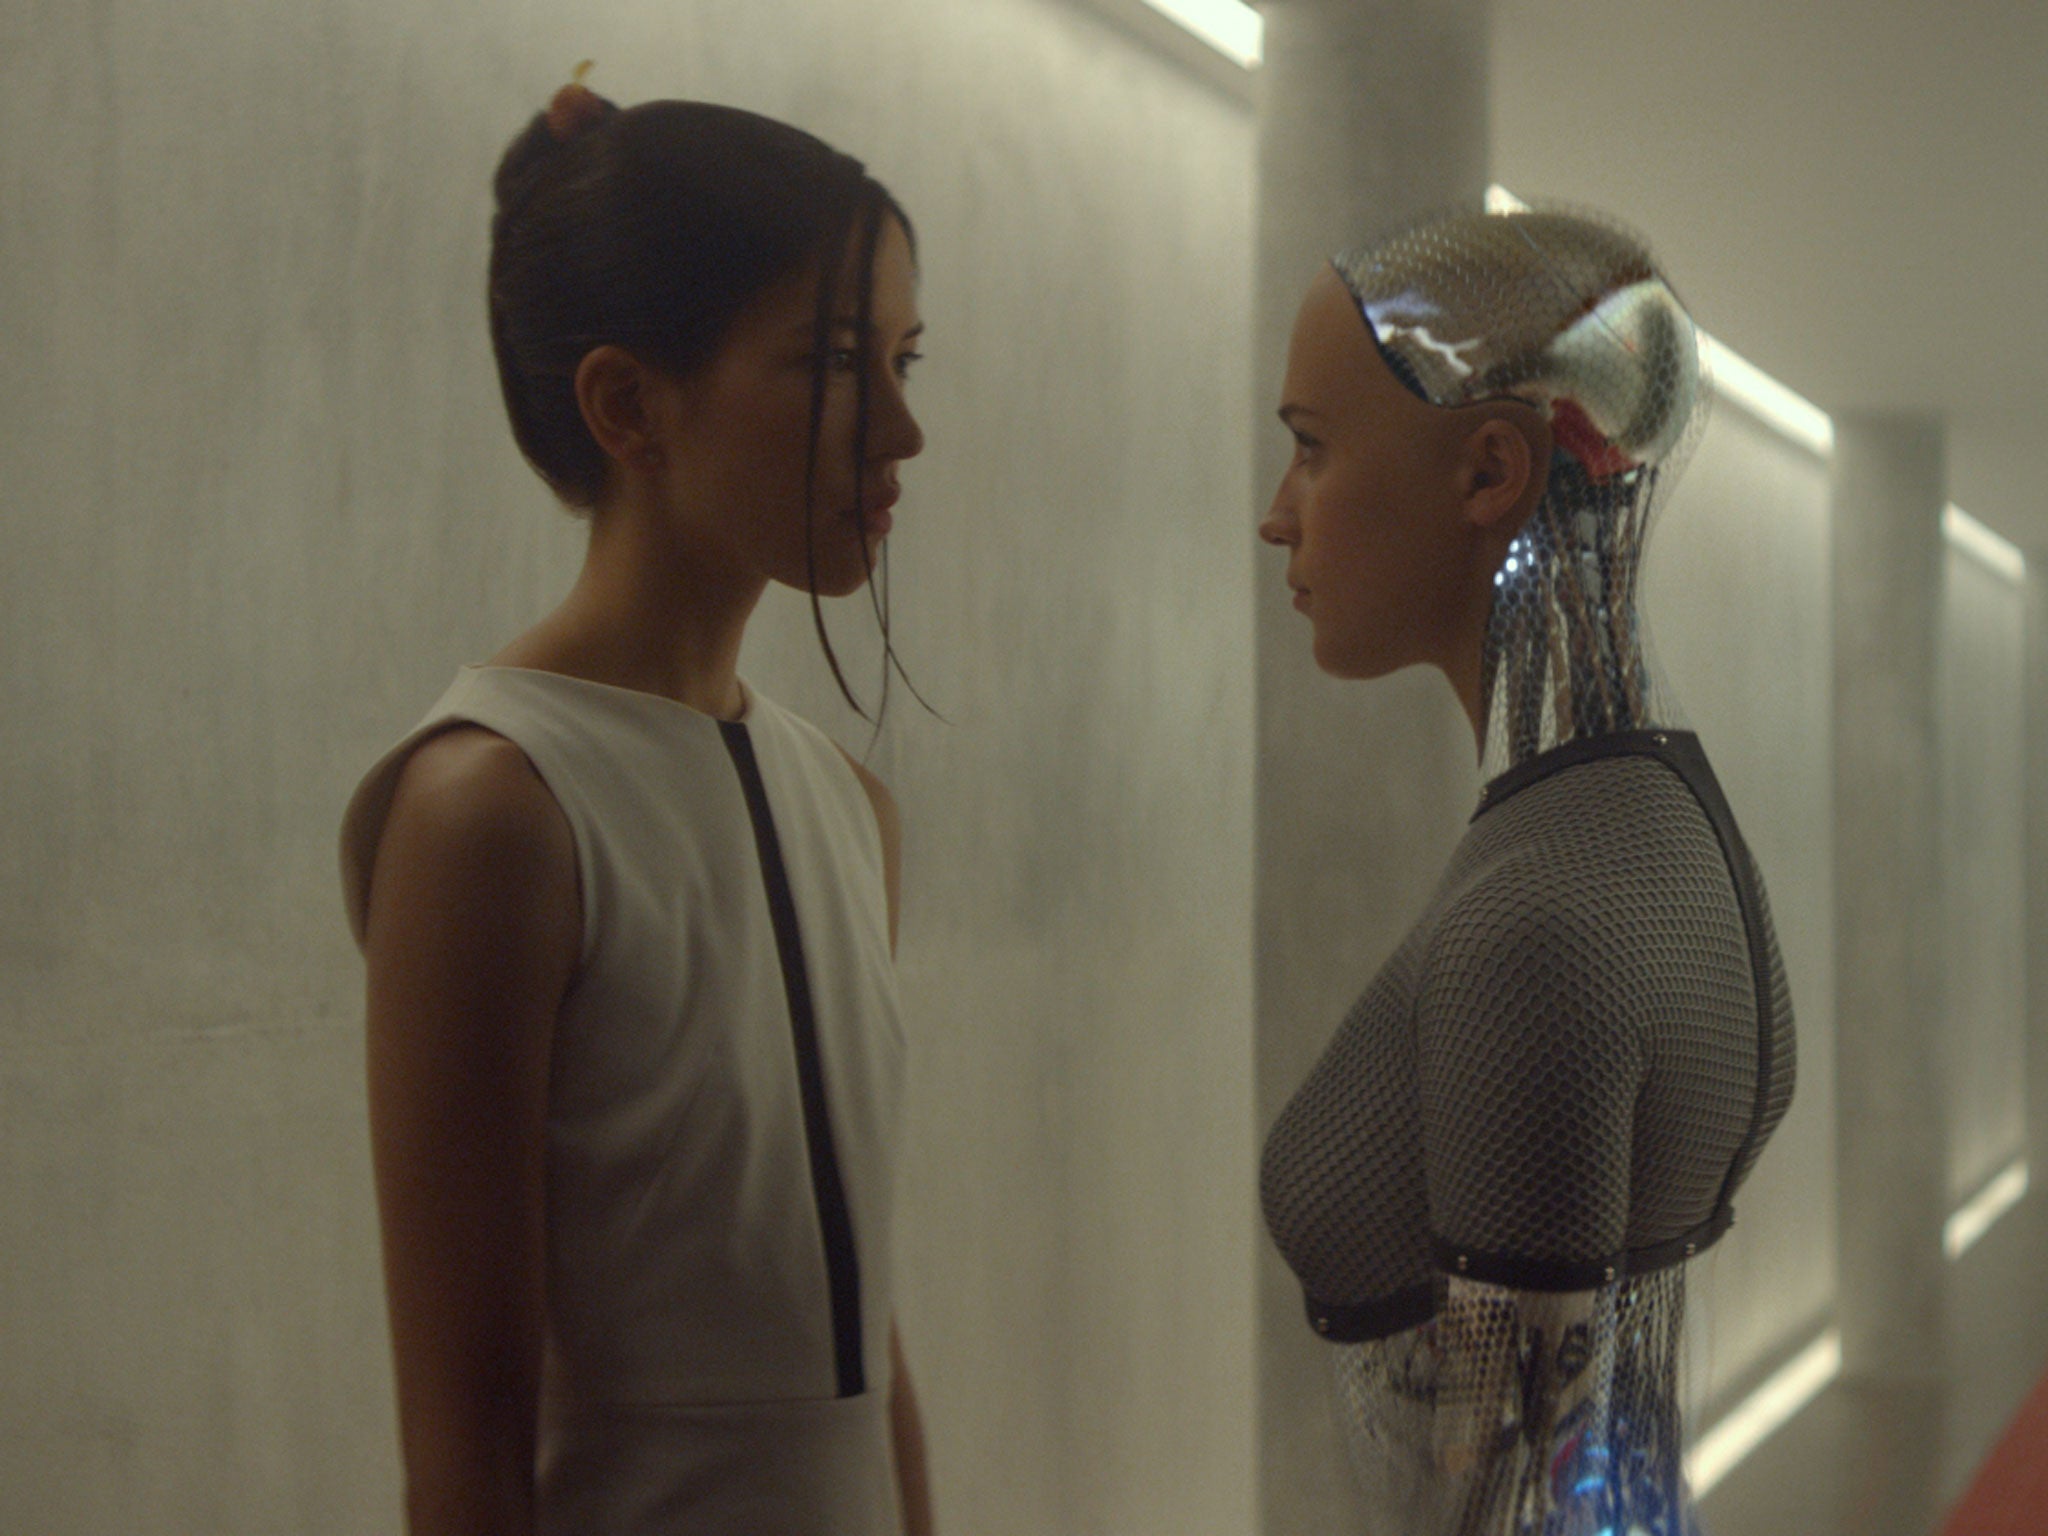 Alex Garland S Ex Machina Is True Artificial Intelligence Sci Fi Or Sci Fact The Independent